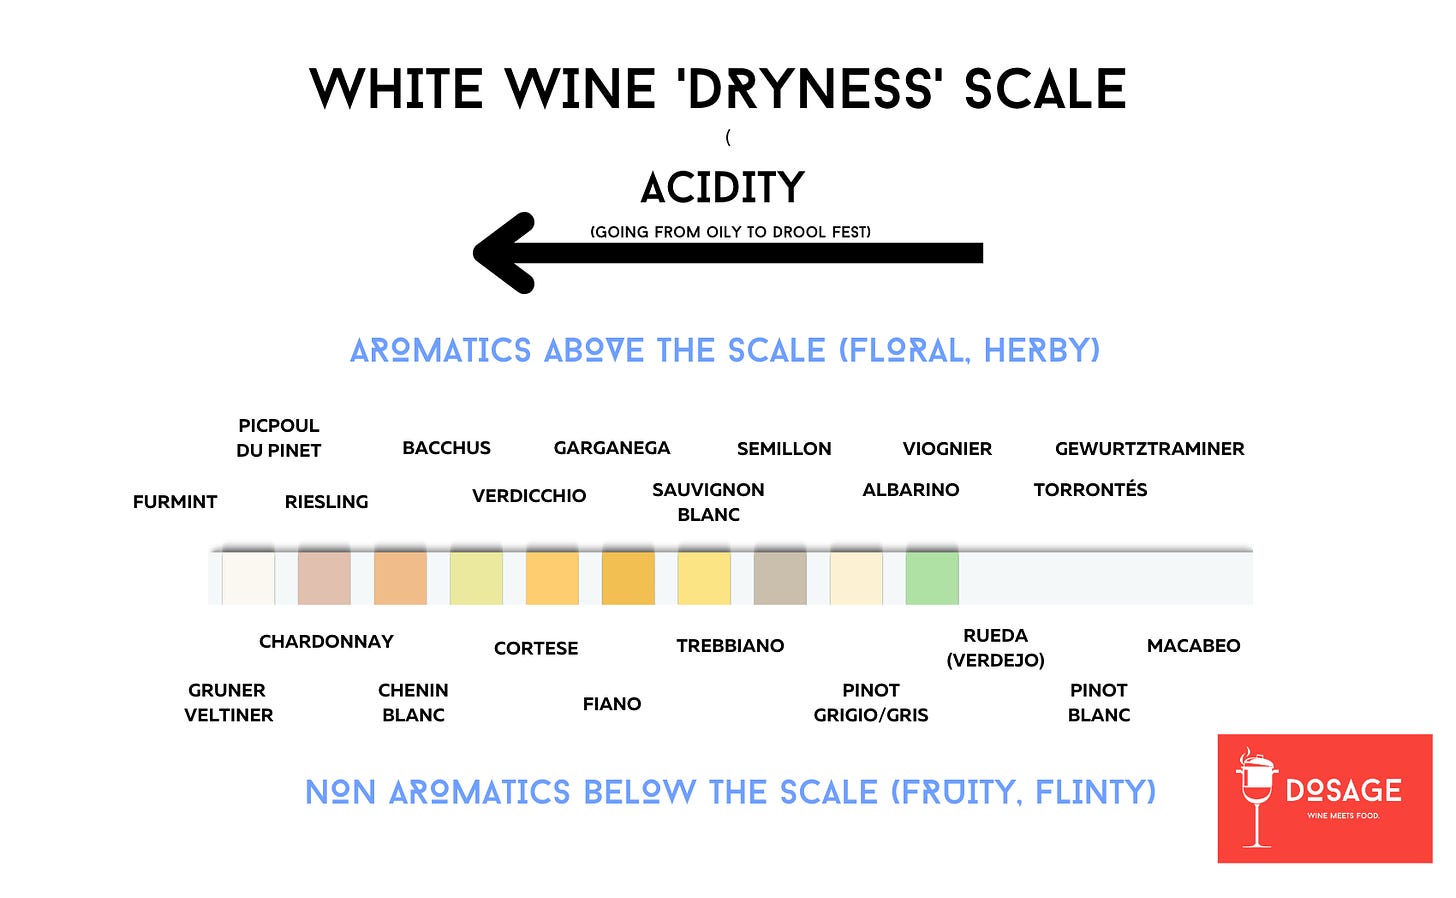 A scale showing how different white wines compare in dryness, based on their acidity or aromatic characteristics. 